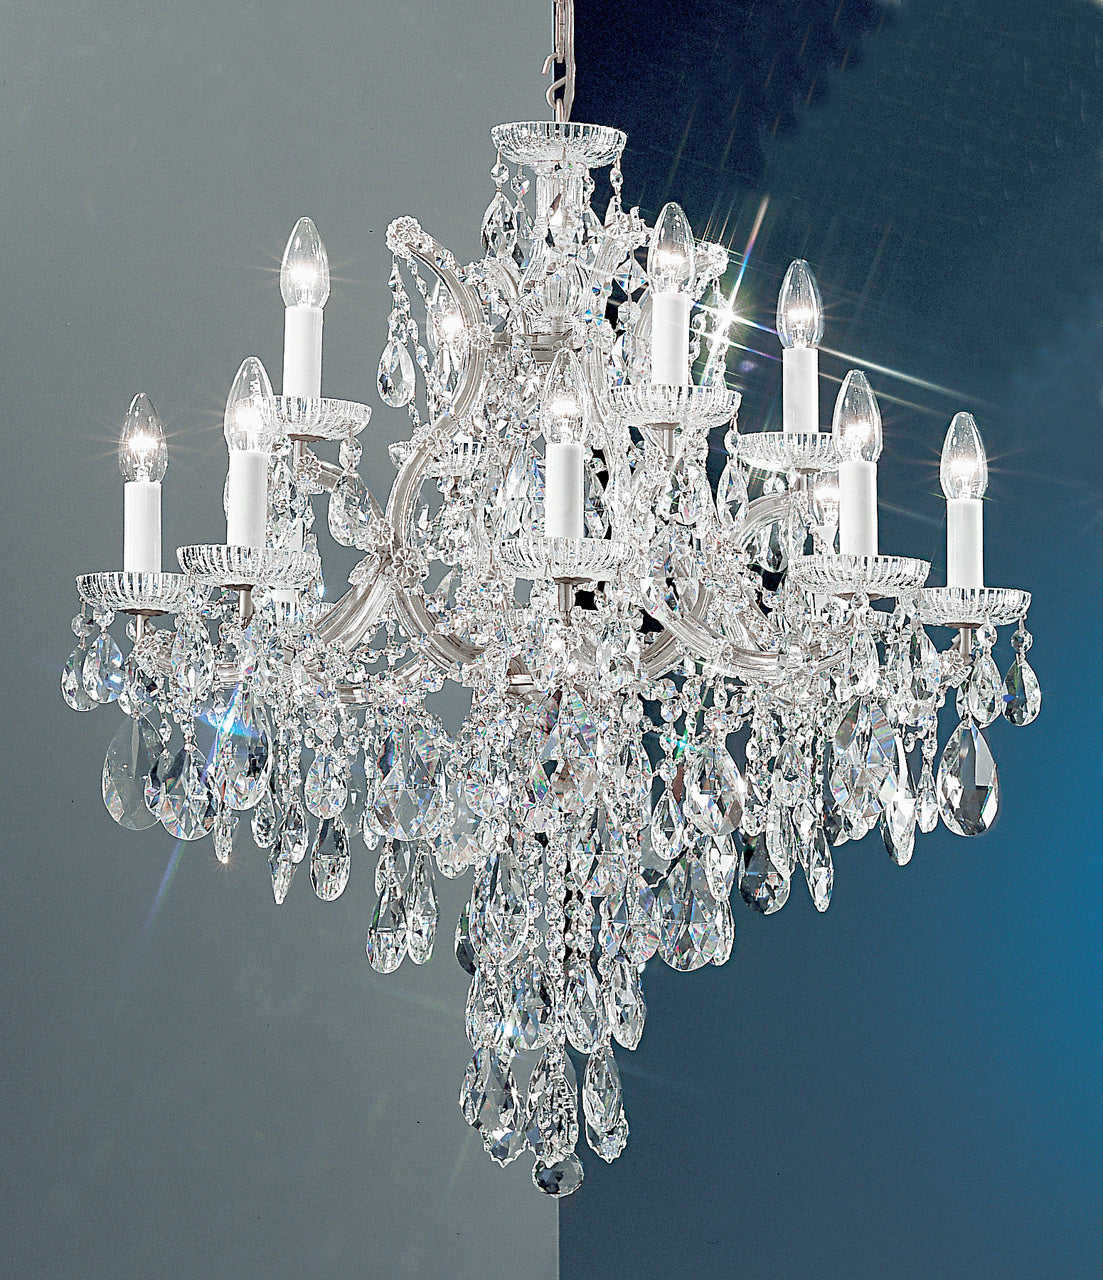 Classic Lighting 8123 CH C Maria Theresa Traditional Crystal Chandelier in Chrome (Imported from Italy)